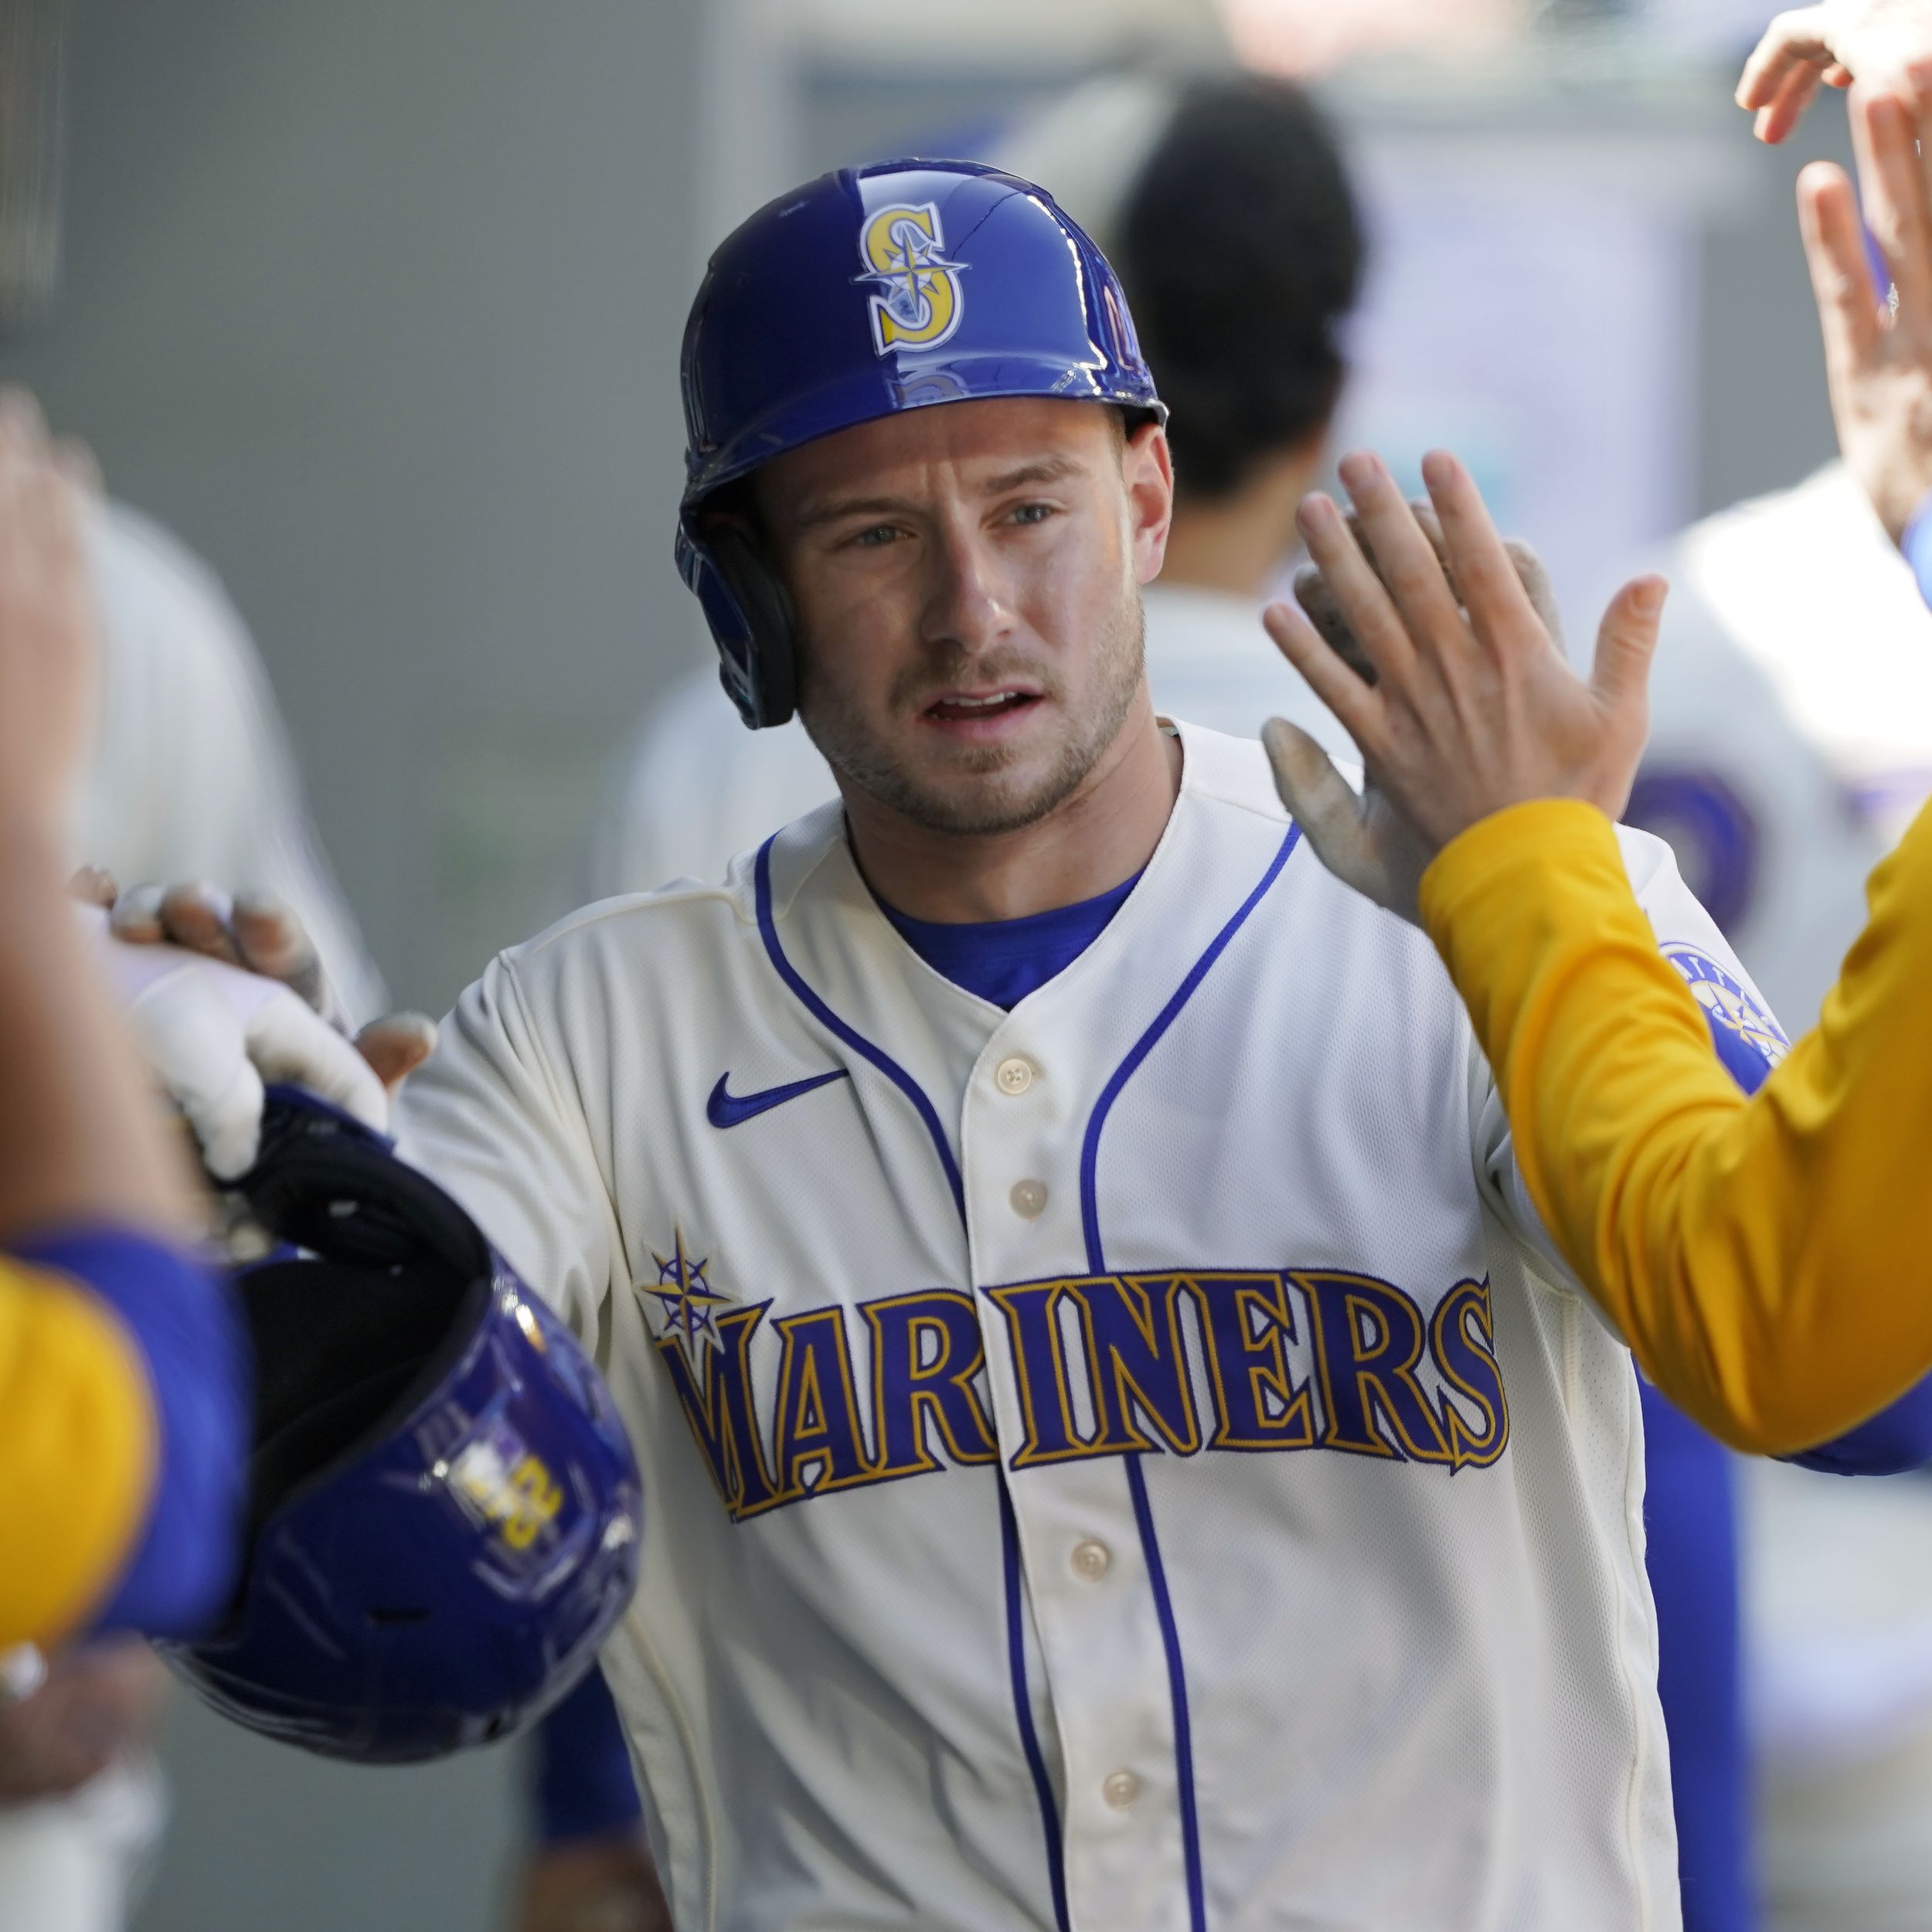 Mariners show off new uniforms, but they don't help them connect vs. Astros